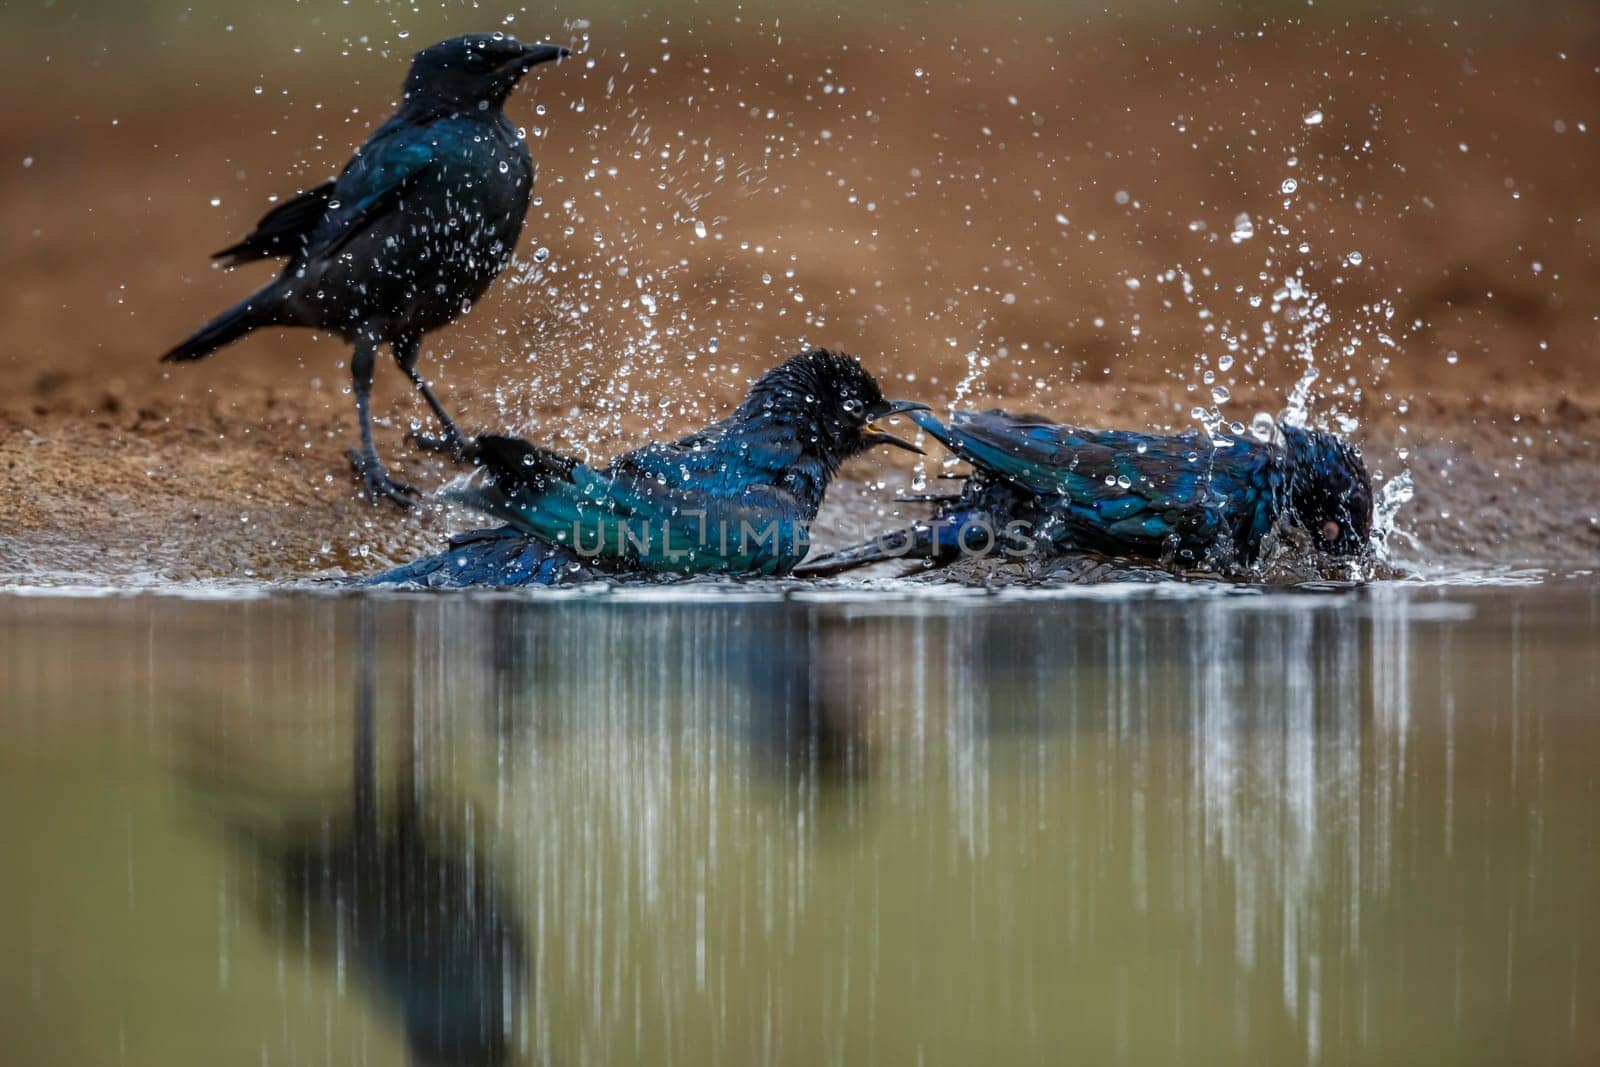 Cape glossy starling in Kruger national park, South Africa by PACOCOMO